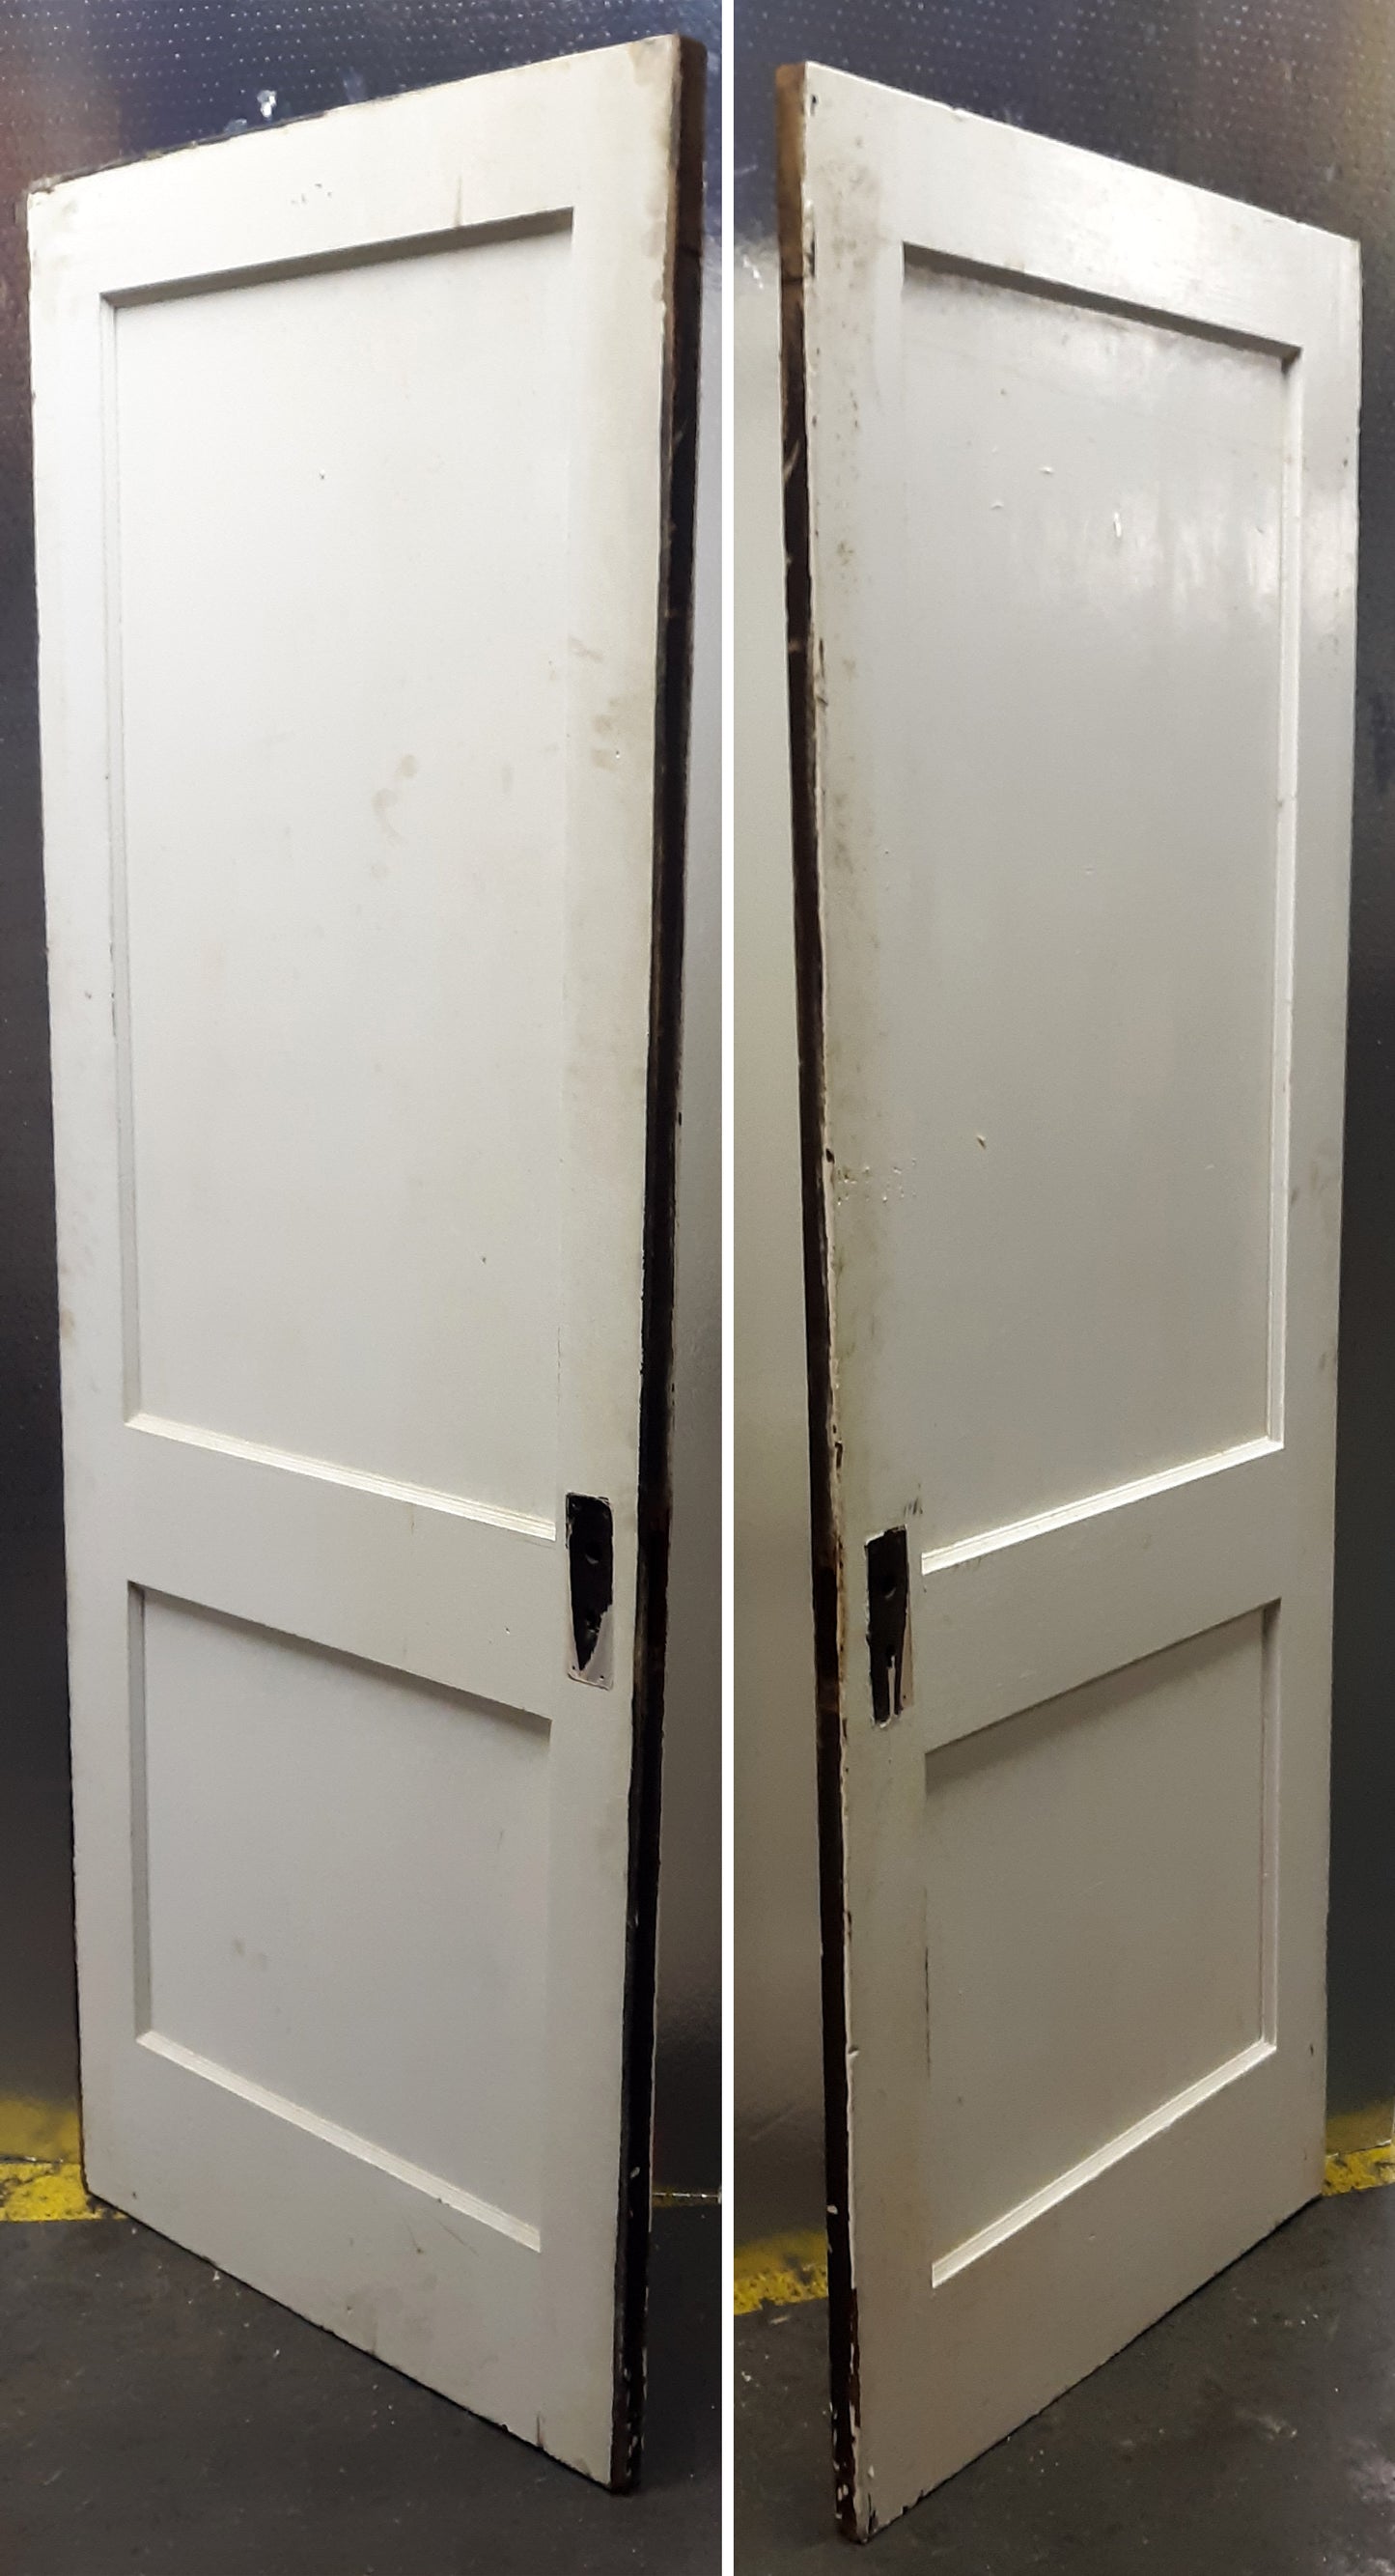 6 available 32"x79.5" Antique Vintage Old Salvaged Interior Wood Wooden Doors 2 Panels